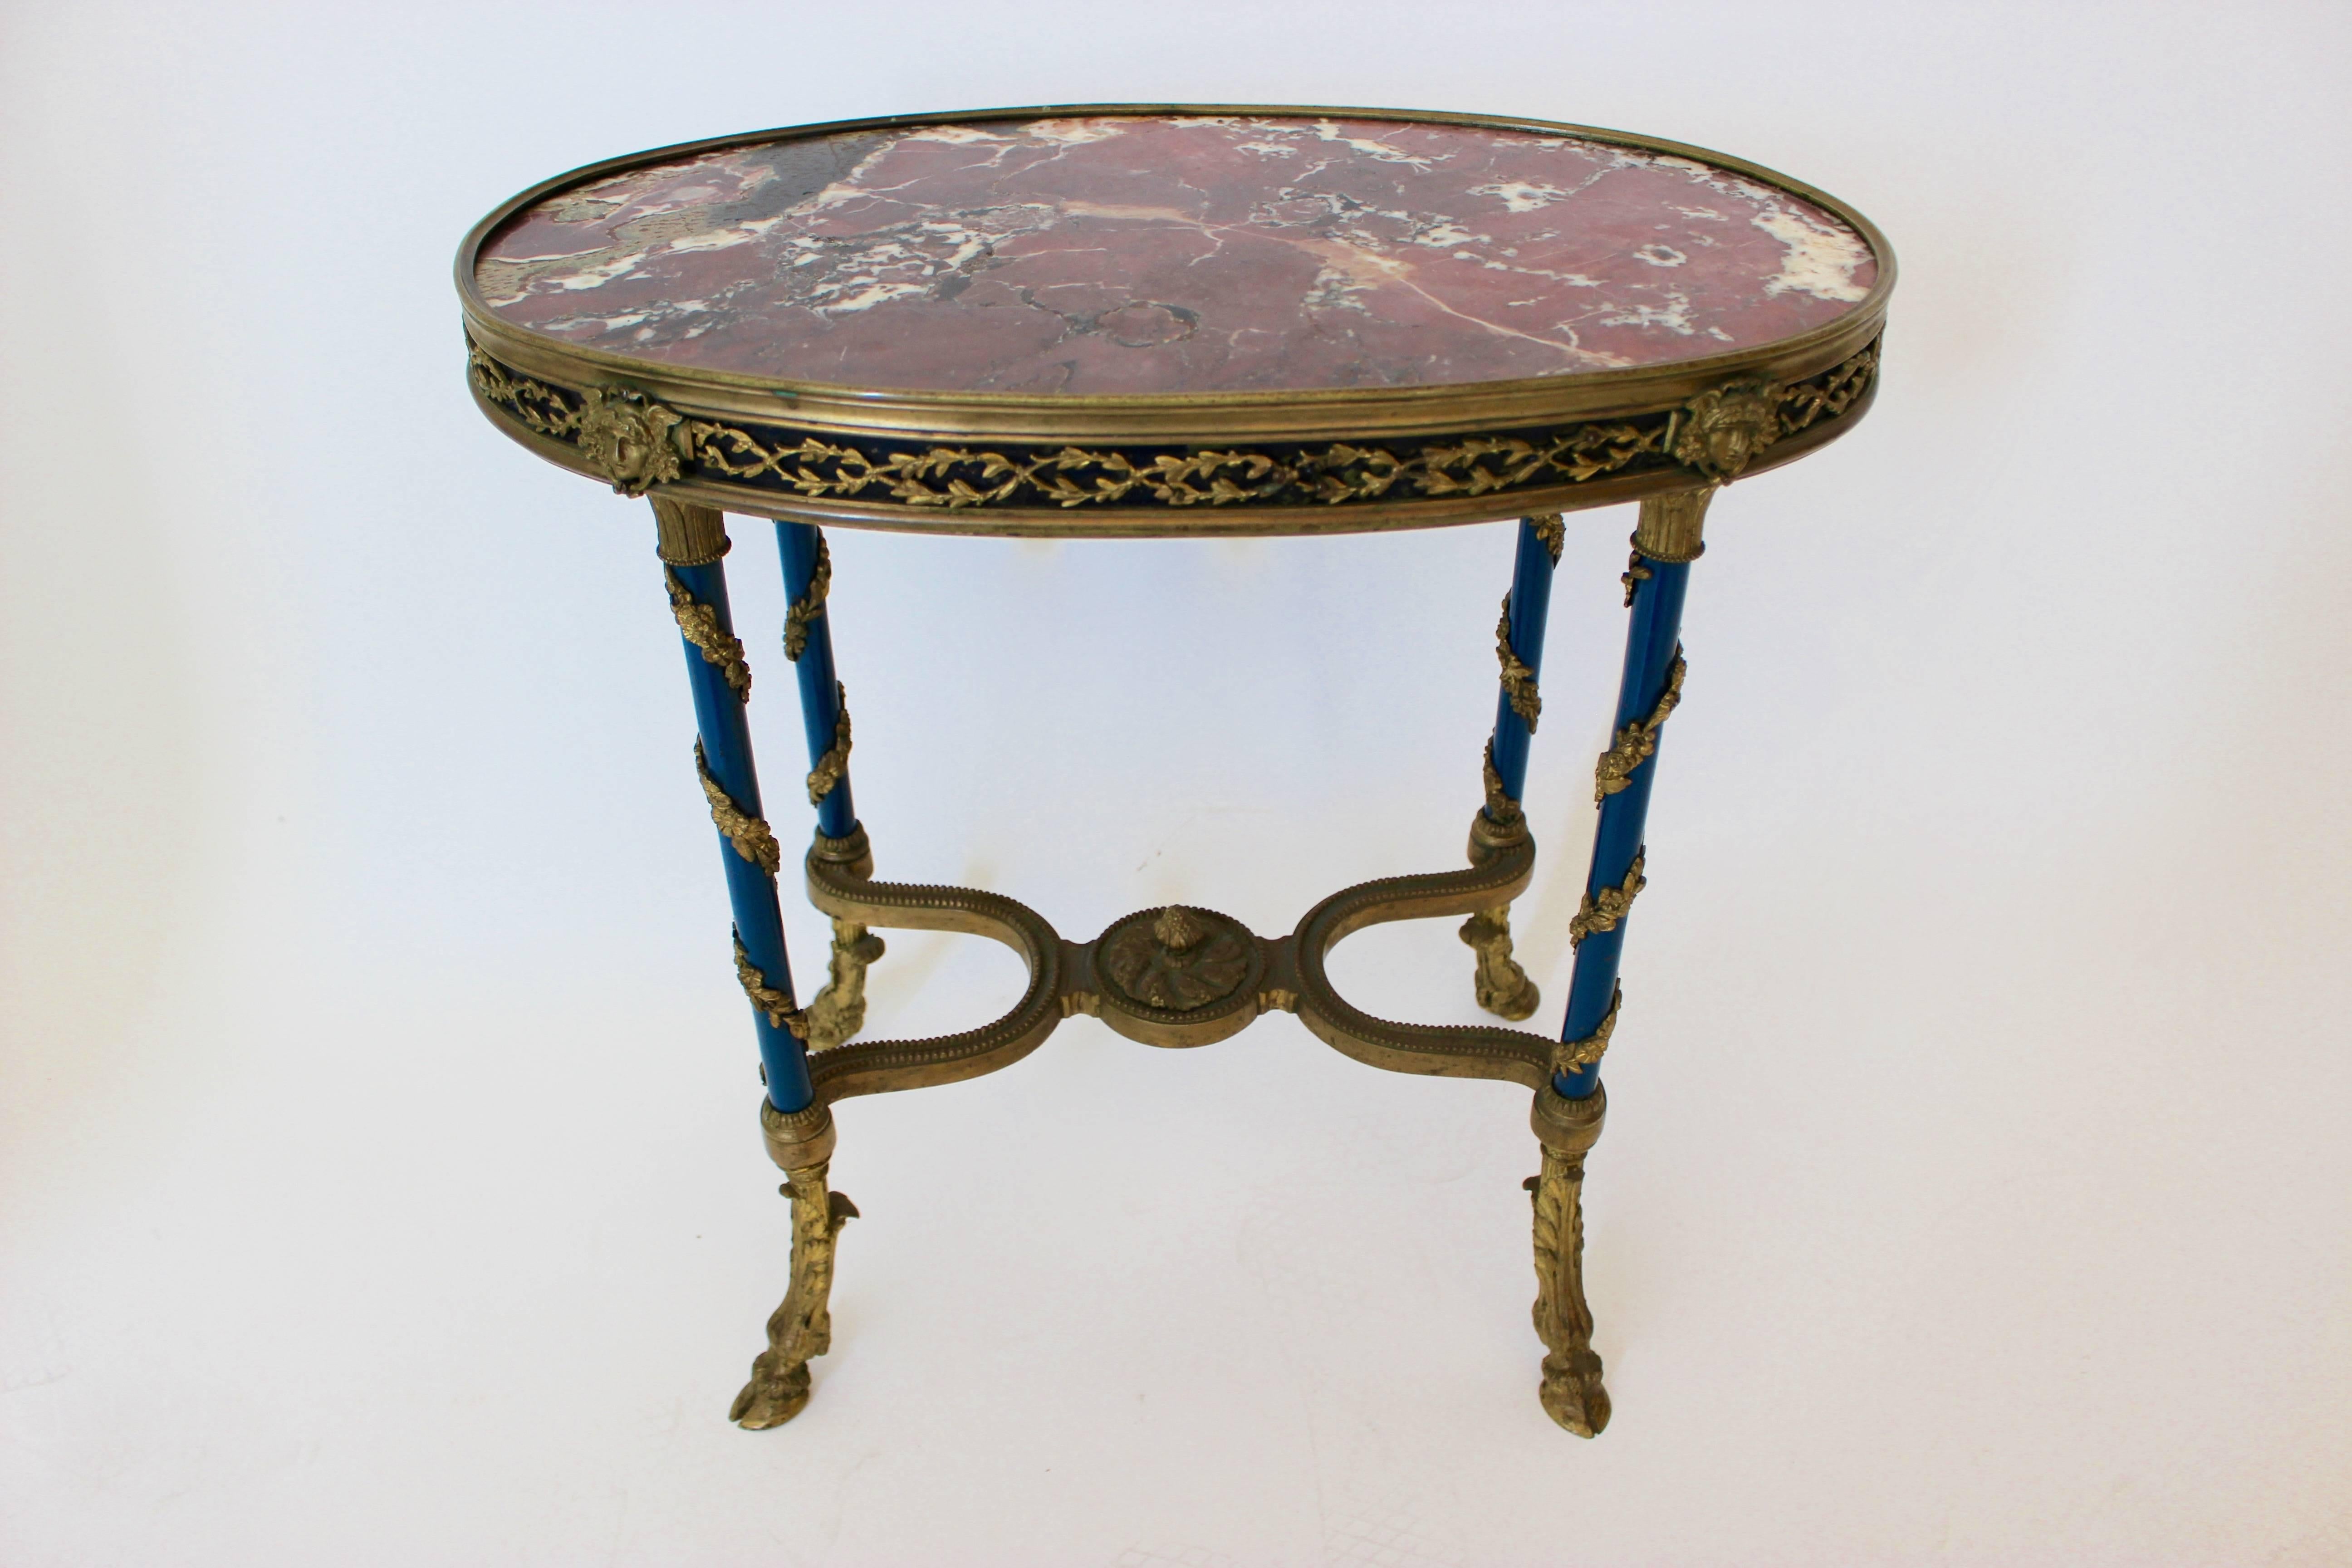 19th Century French Gilt Bronze-Mounted and Patinated Metal Oval Low Occasional Table